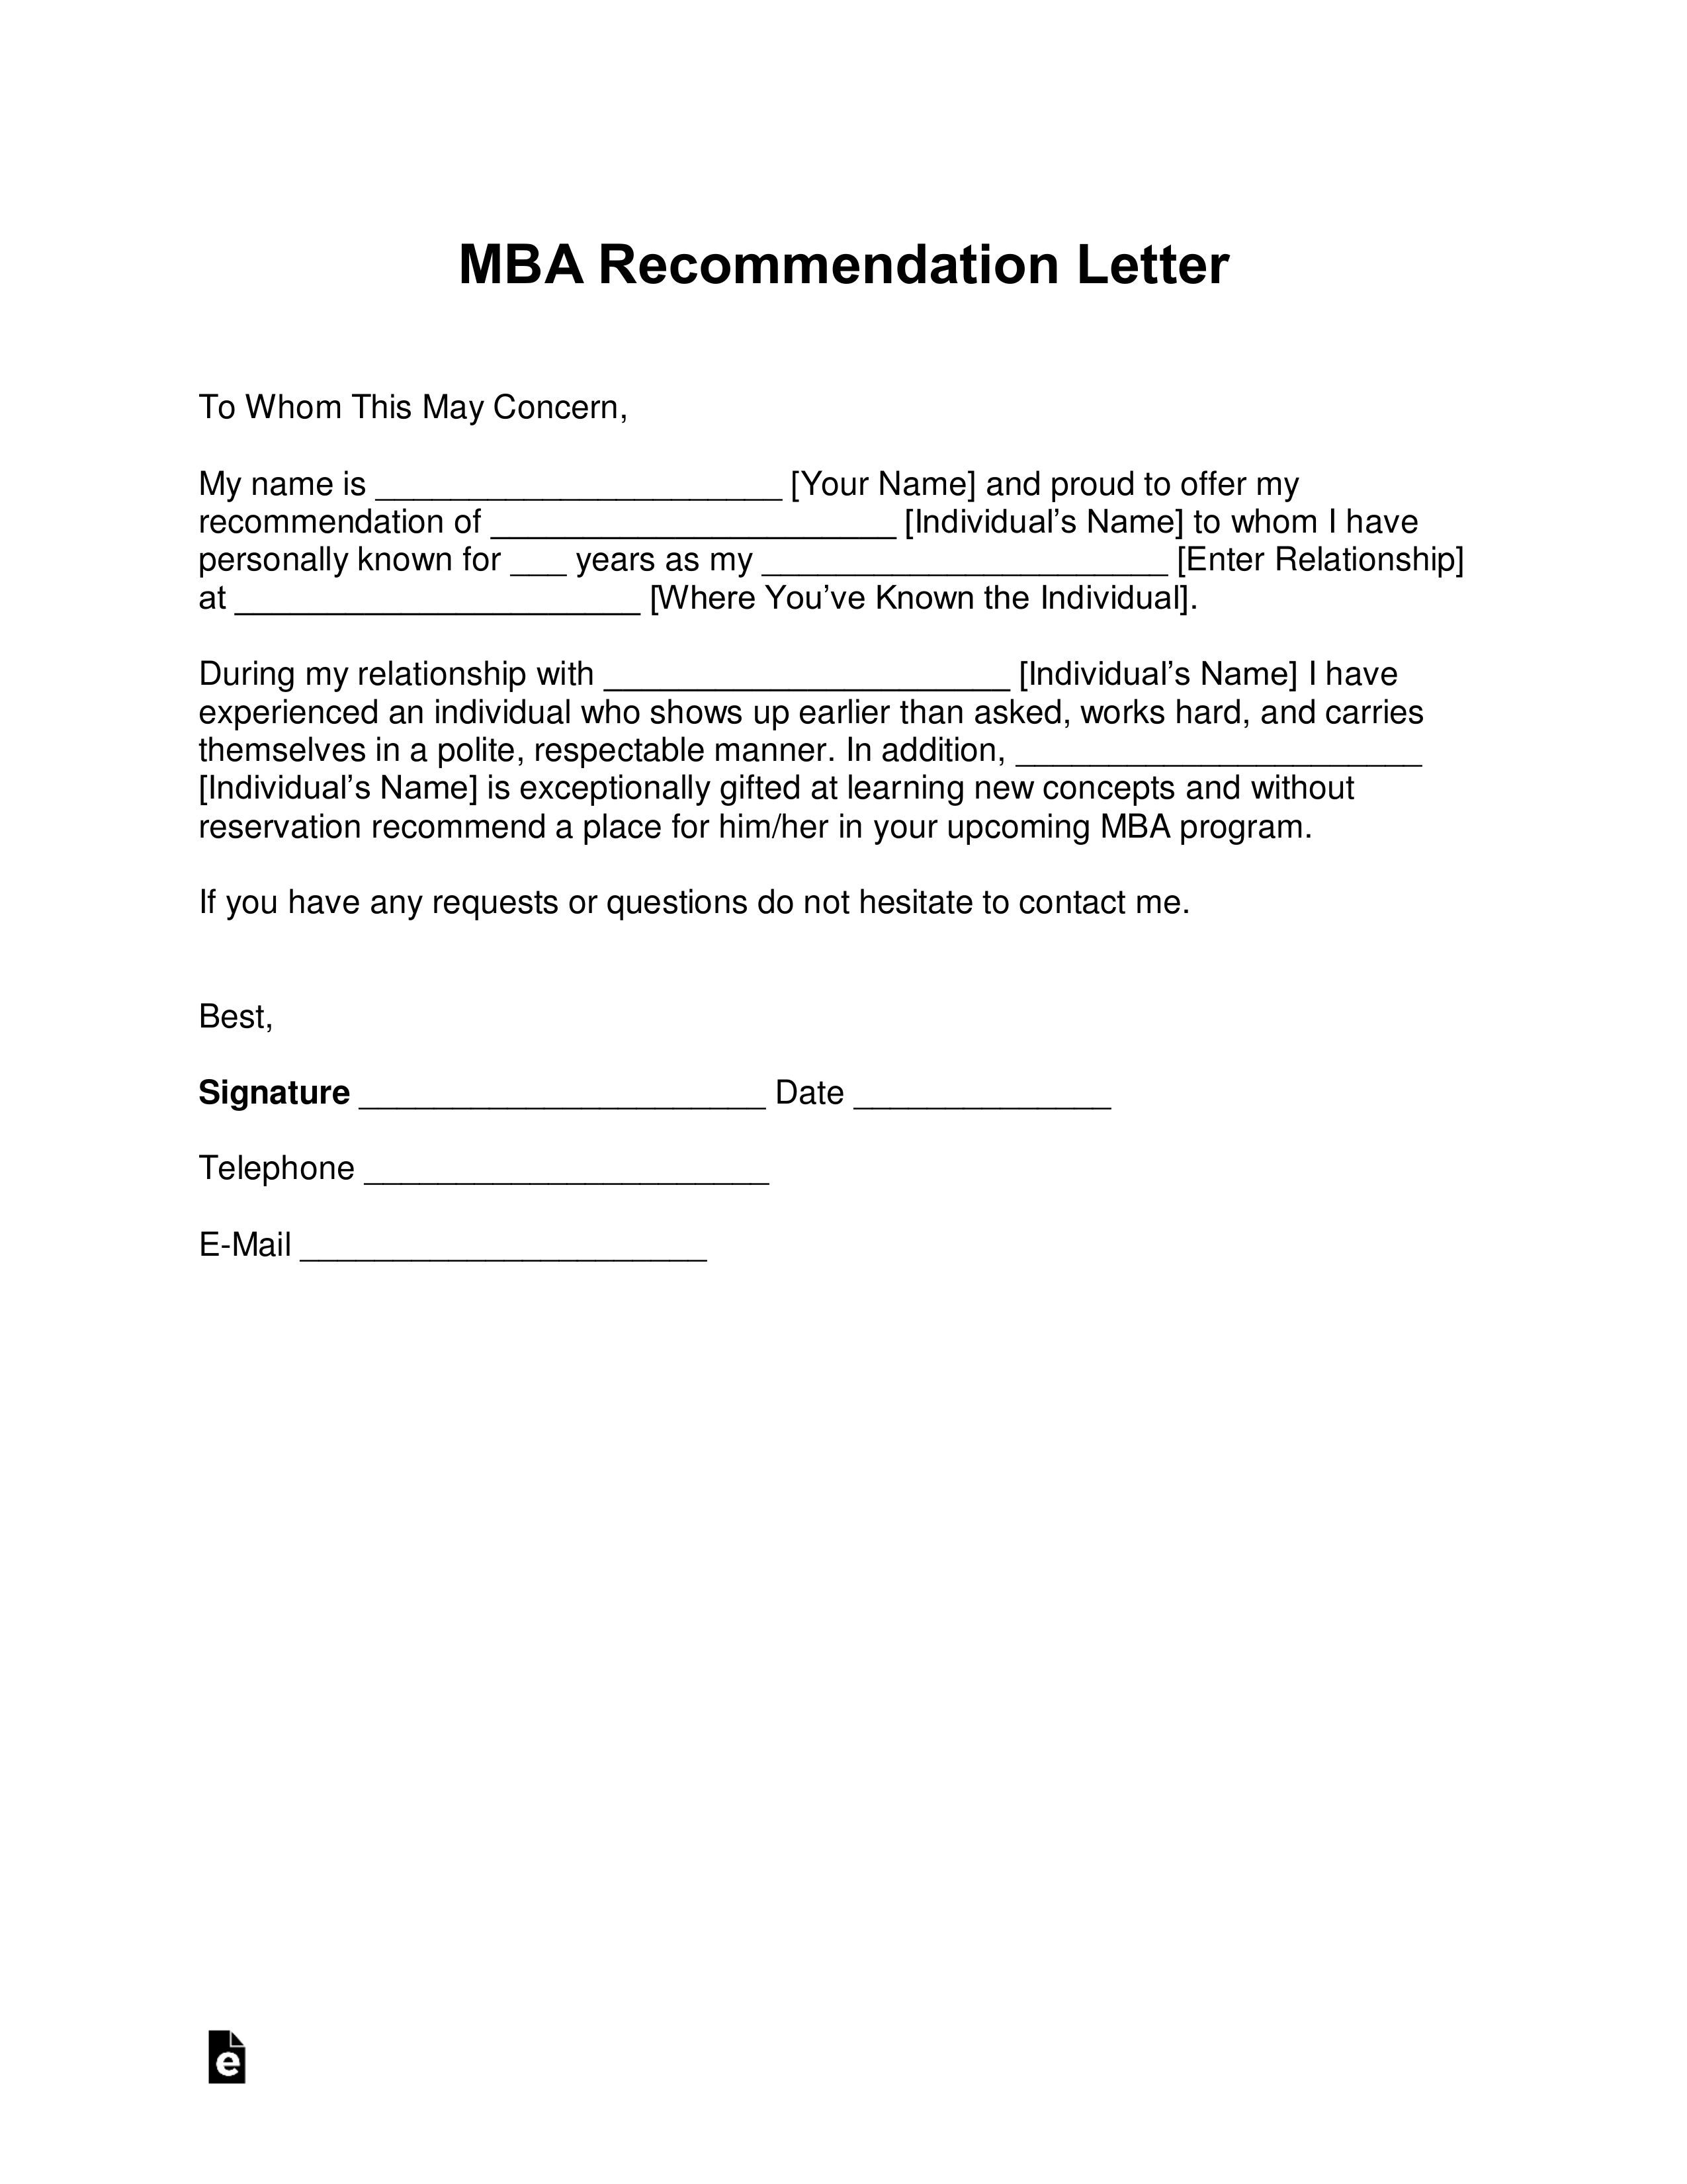 Recommendation Letter For Coworker Pdf from eforms.com